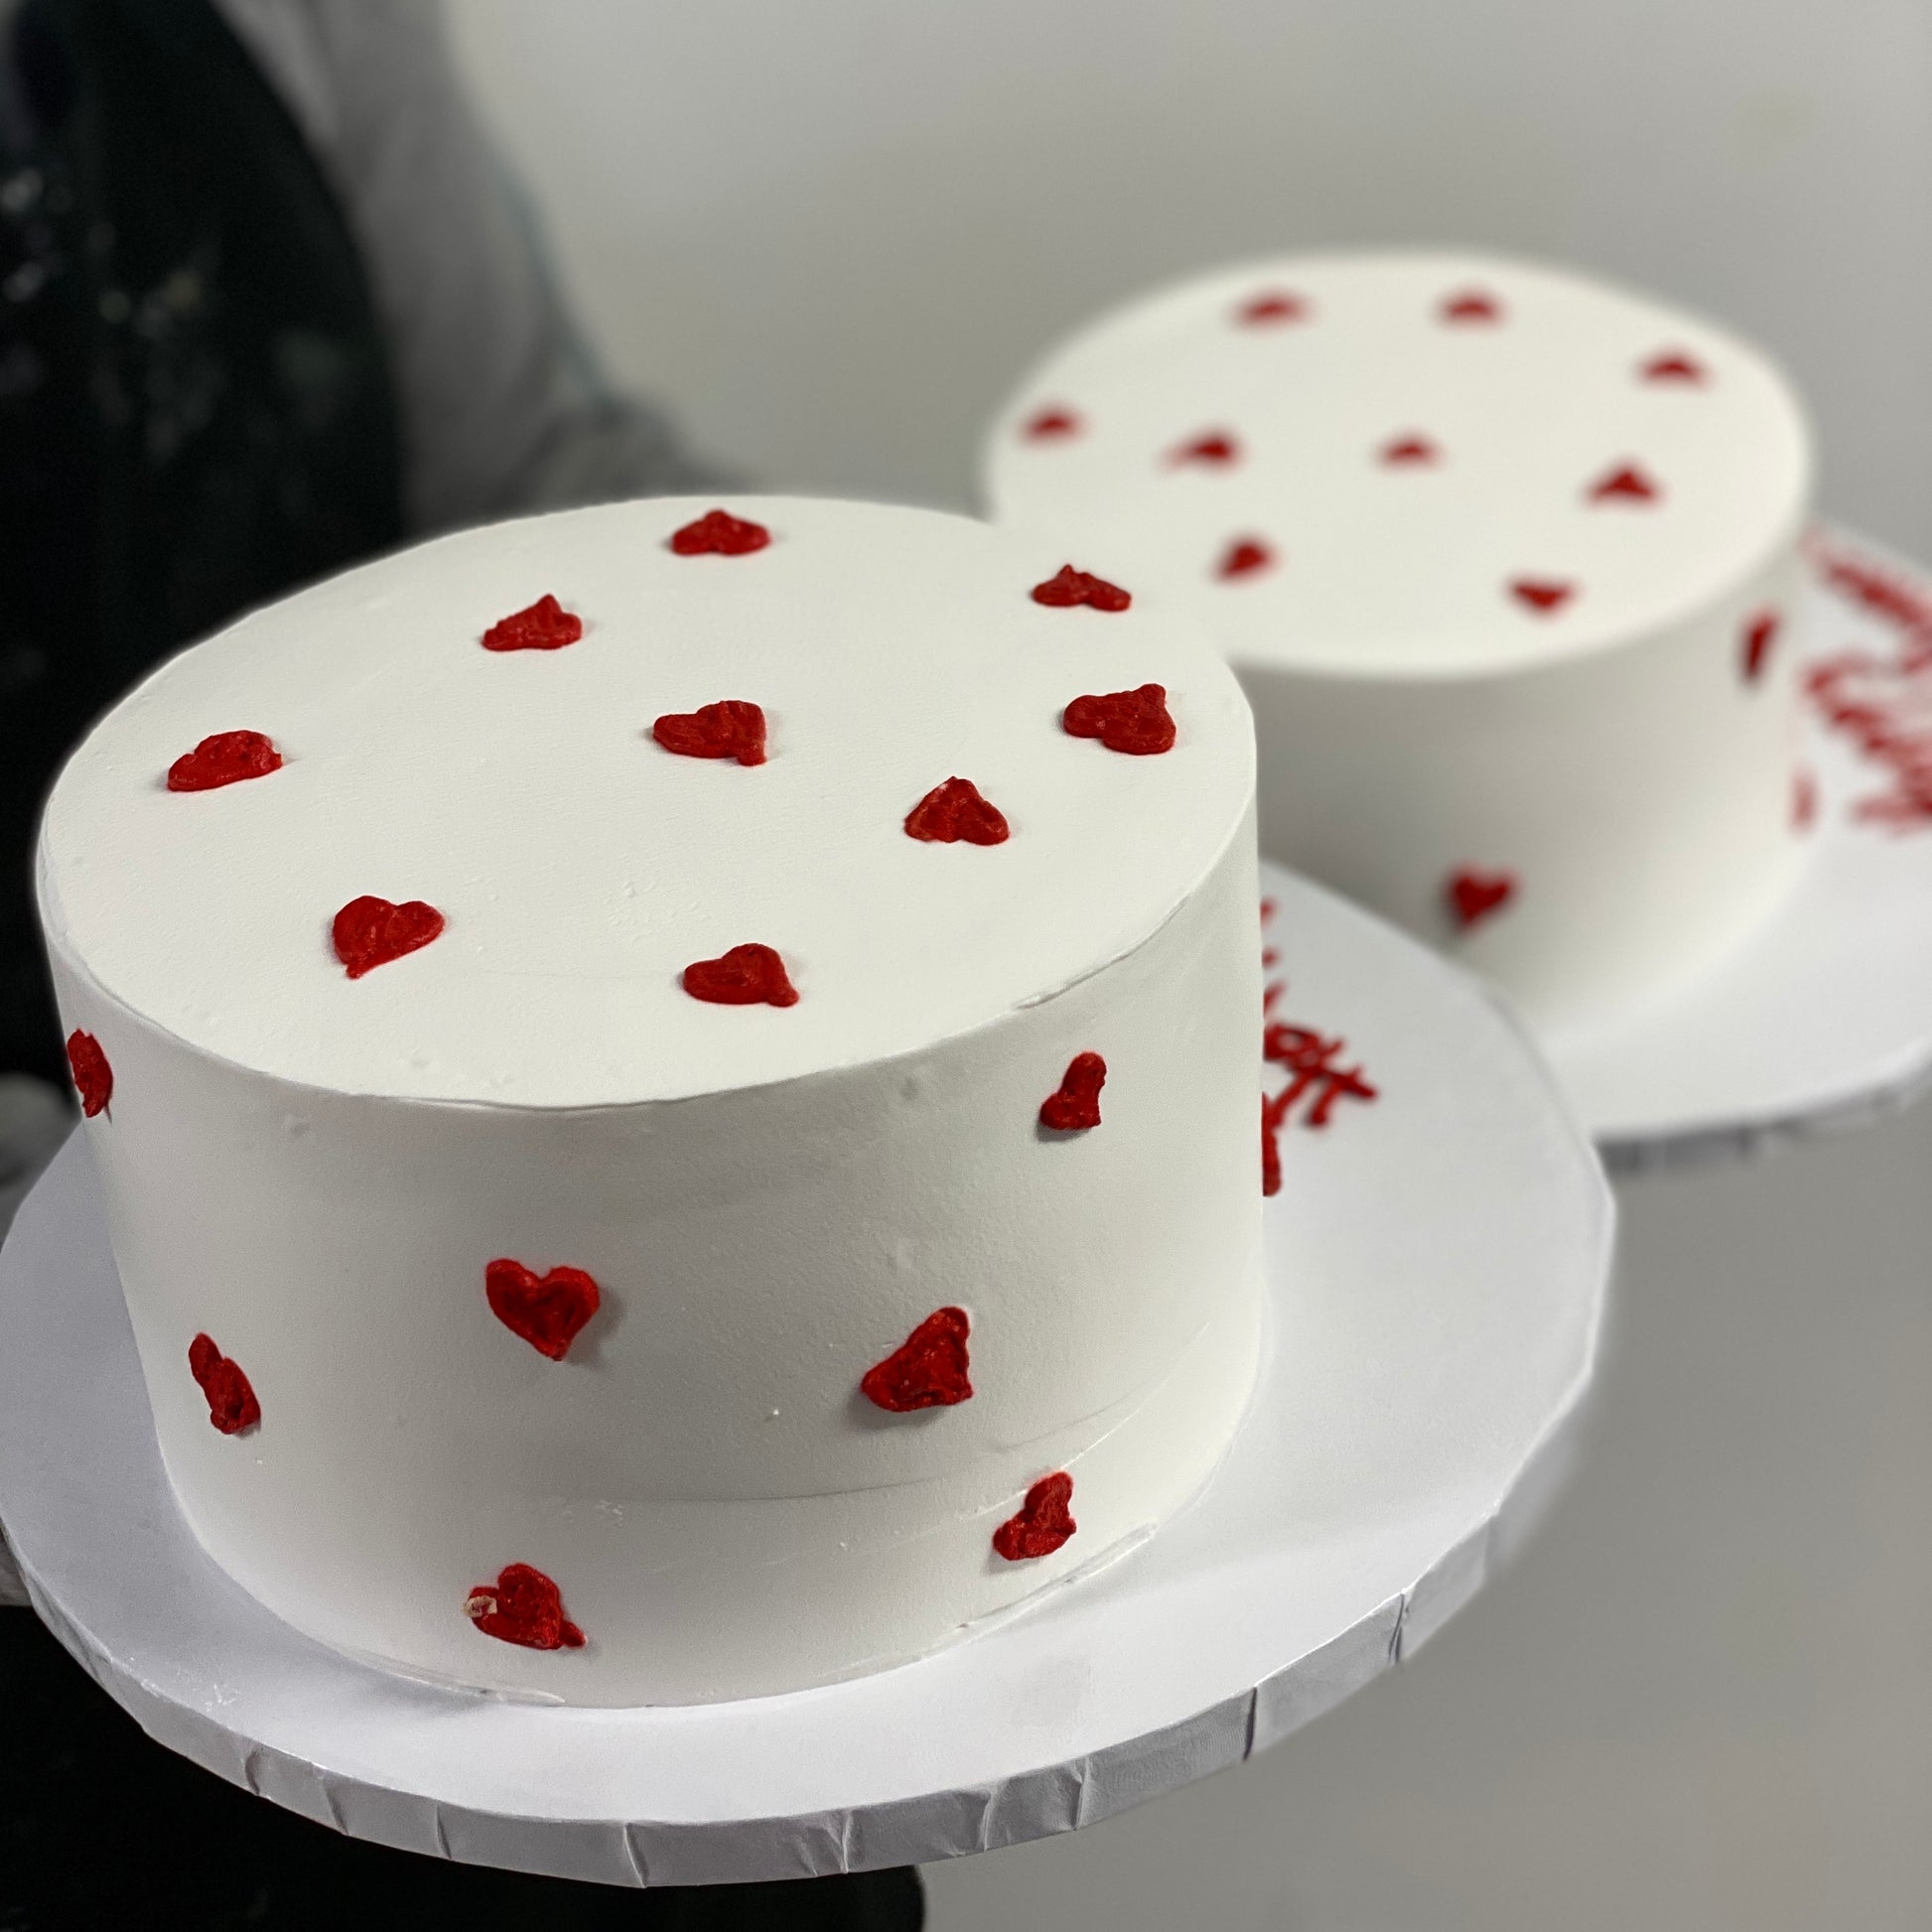 White cake with tiny red hearts